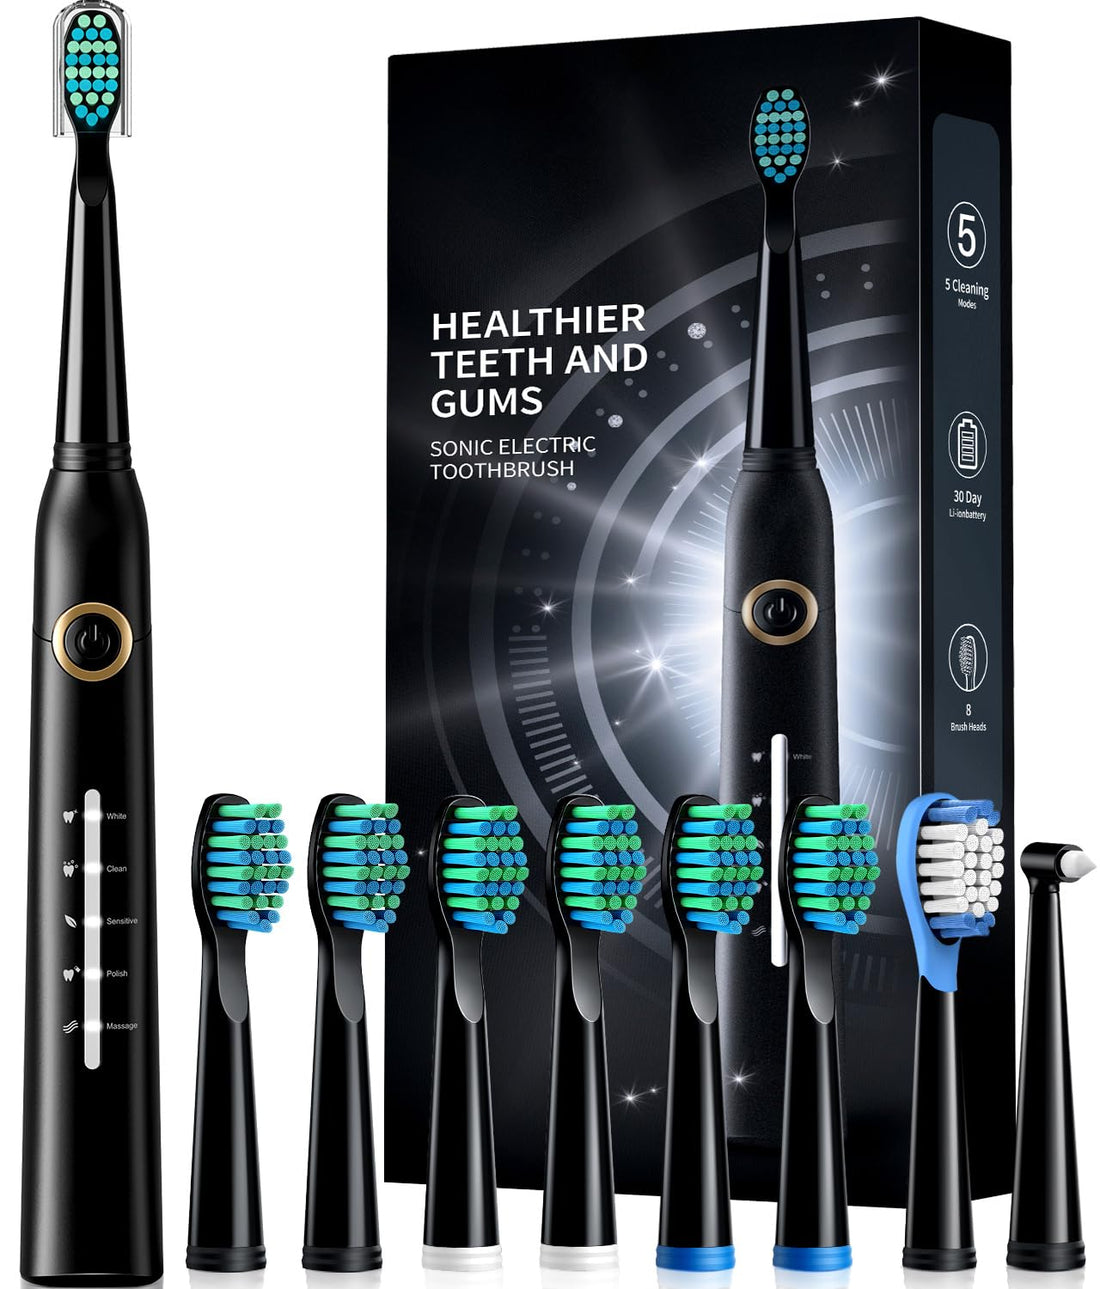 Electric Toothbrush for Adults, 8 𝐁𝐫𝐮𝐬𝐡 𝐇𝐞𝐚𝐝𝐬 Sonicare Electric Toothbrush with 40000 VPM Deep Clean 5 Modes, Rechargeable Toothbrushes Fast Charge 4 𝐇𝐨𝐮𝐫𝐬 𝐋𝐚𝐬𝐭 45 𝐃𝐚𝐲𝐬